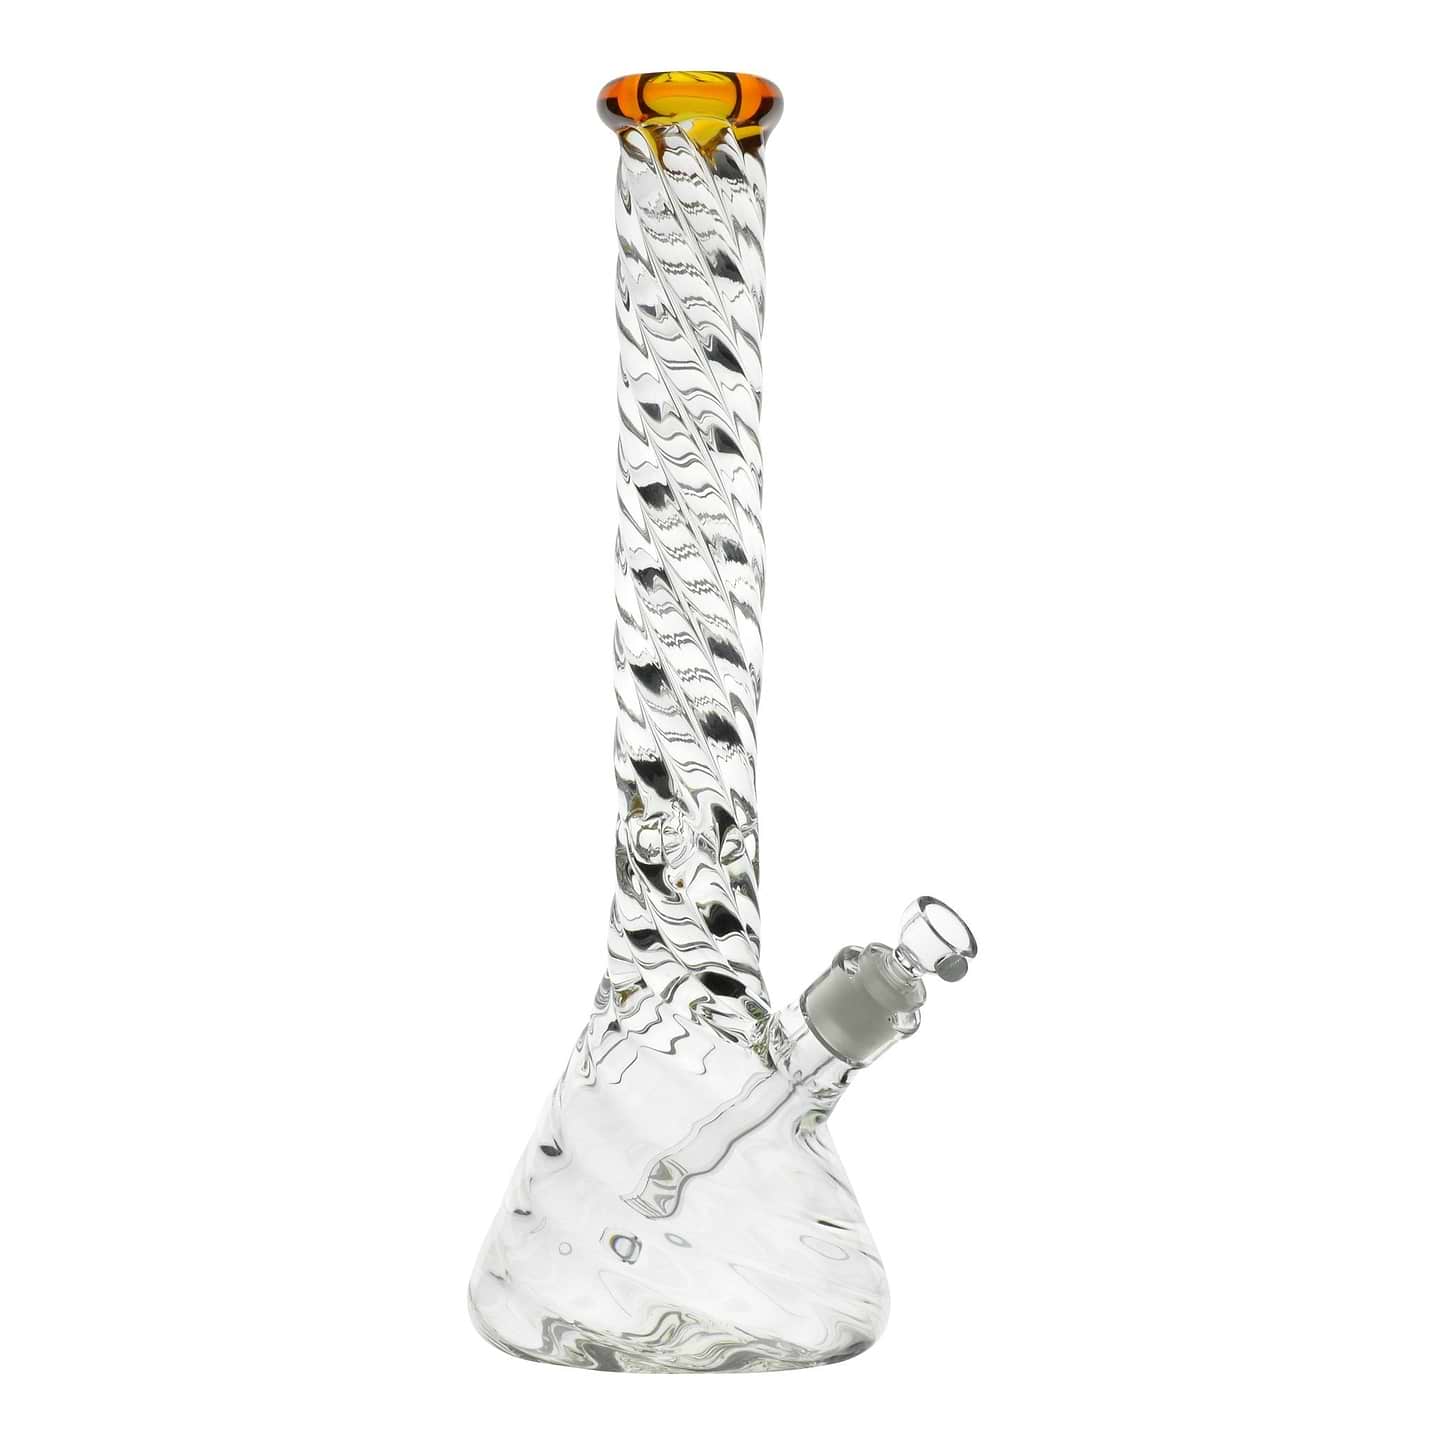 Twisted Tower Beaker Bong - 16in